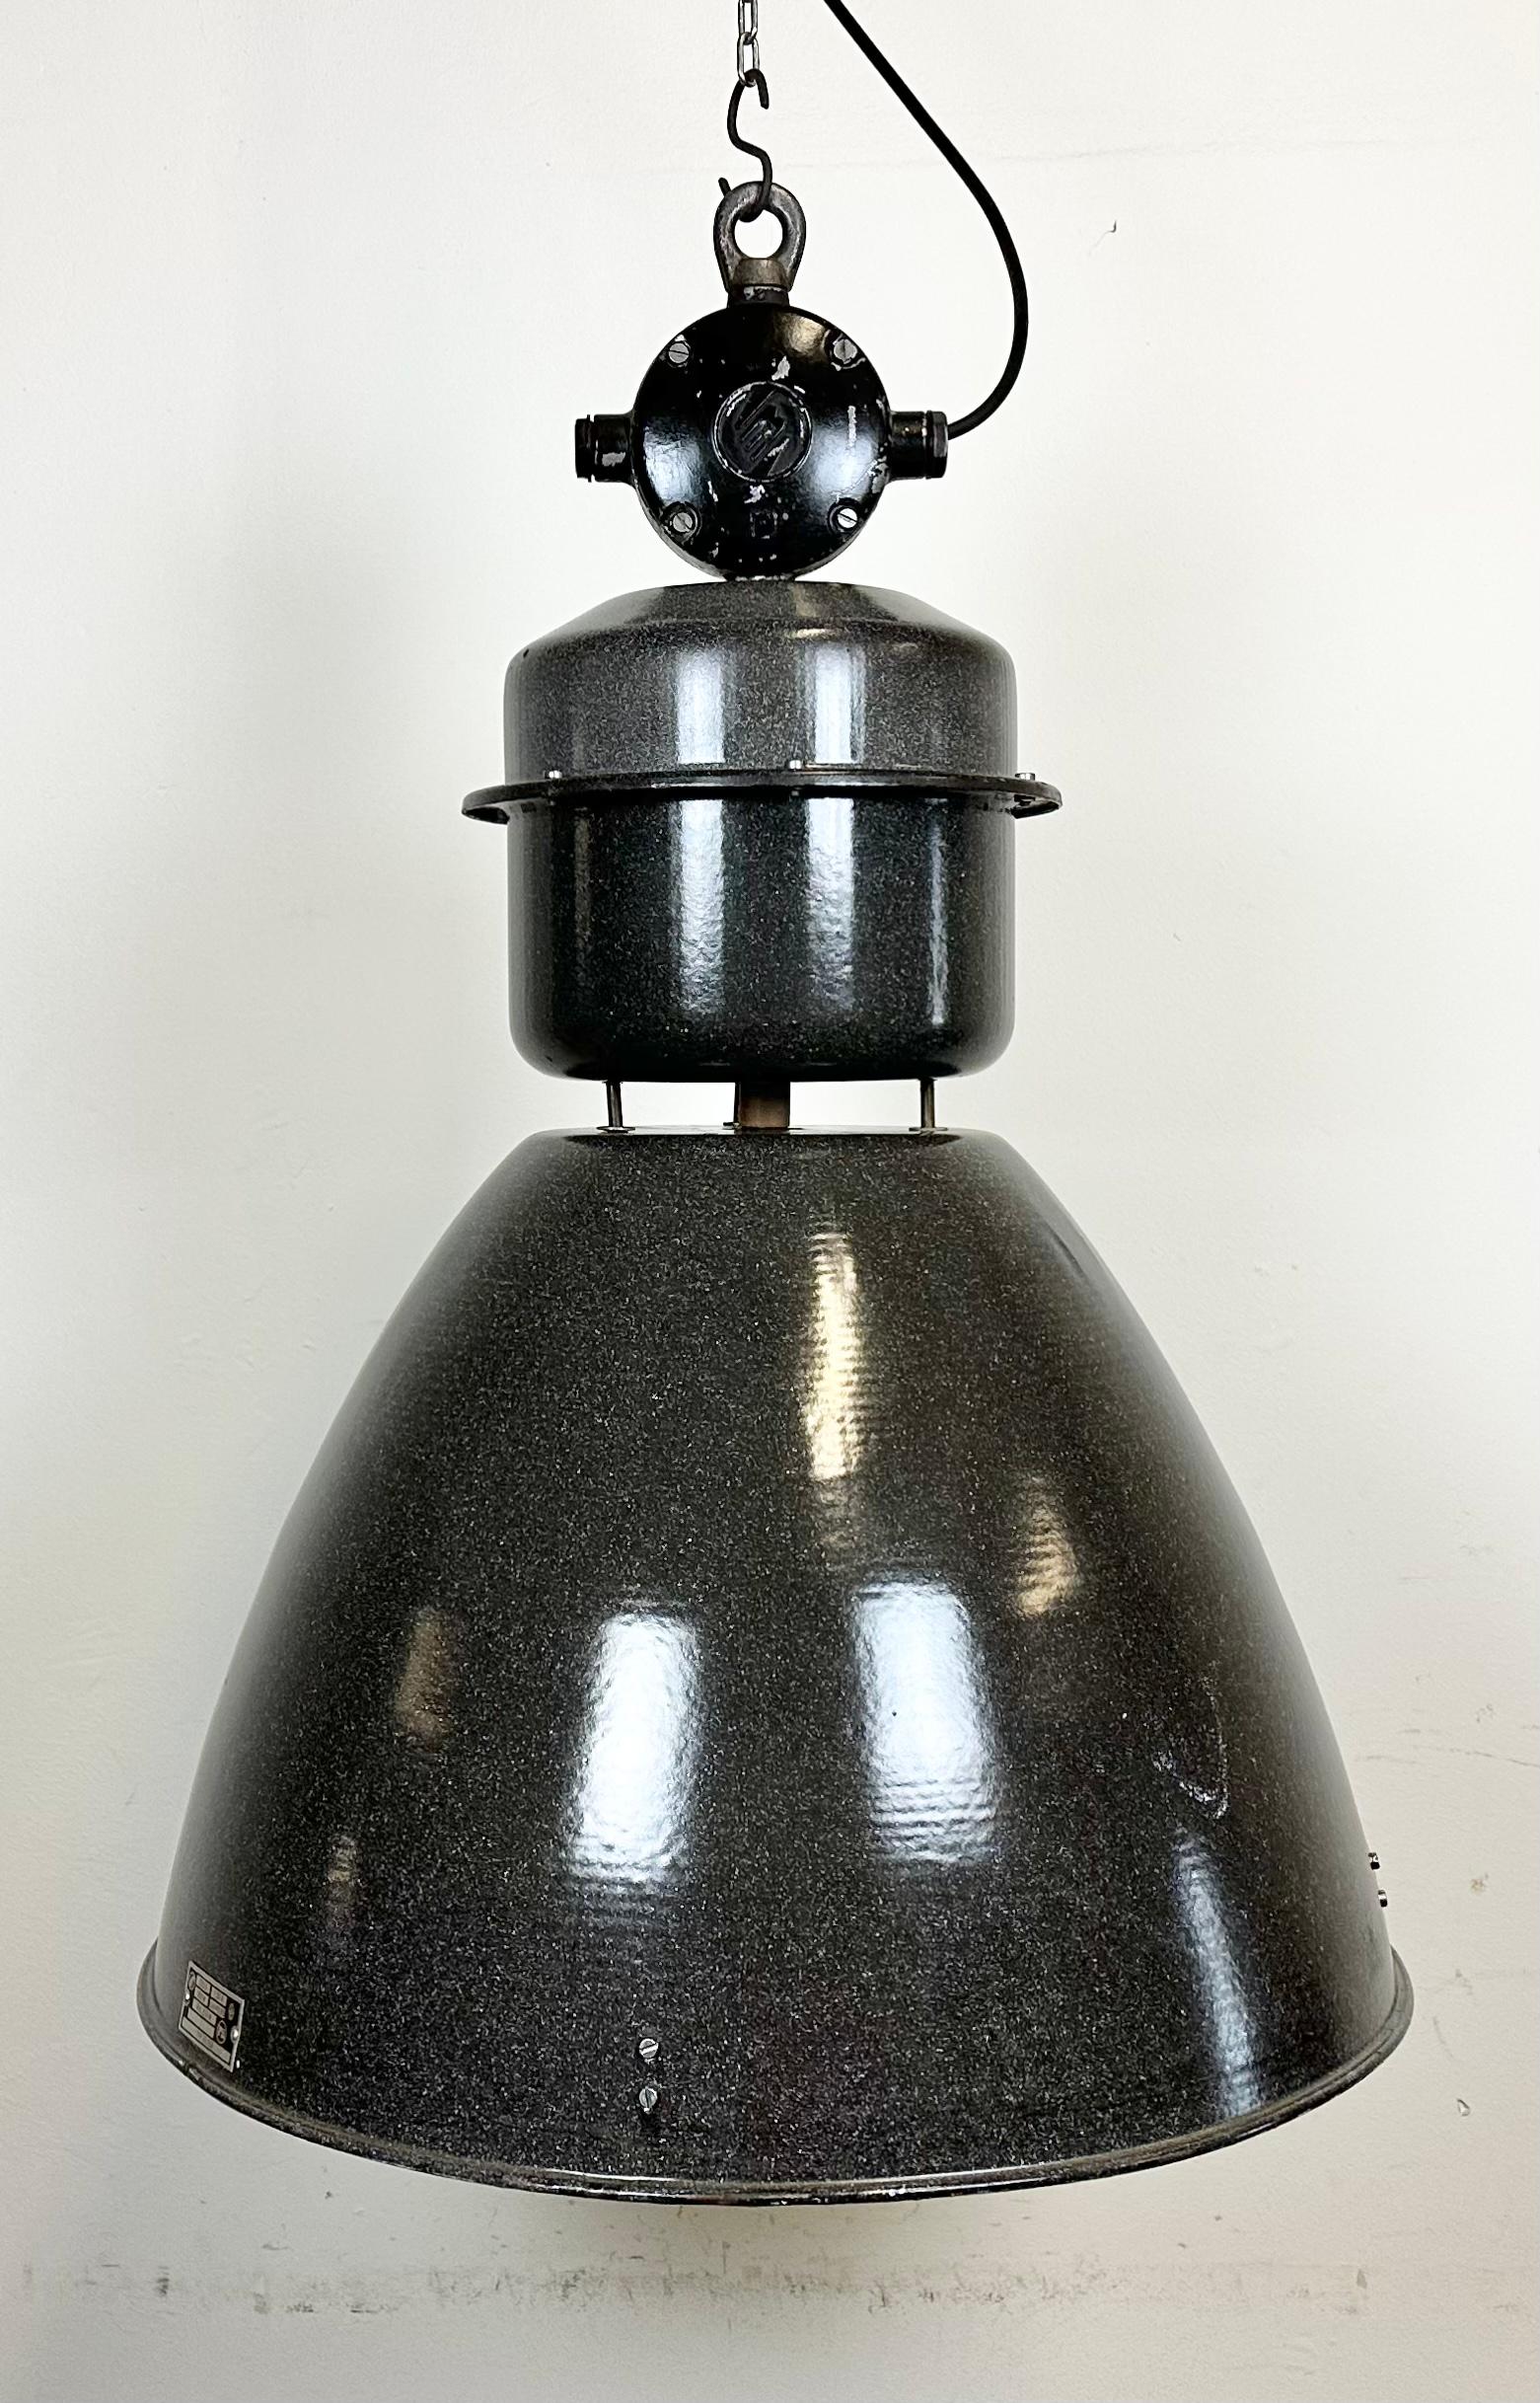 This grey Industrial pendant light was designed in the 1960s and produced by Elektrosvit in former Czechoslovakia. It features a cast aluminum top, a dark grey enamel exterior and a white enamel interior.
New porcelain socket for E 27 / E 26